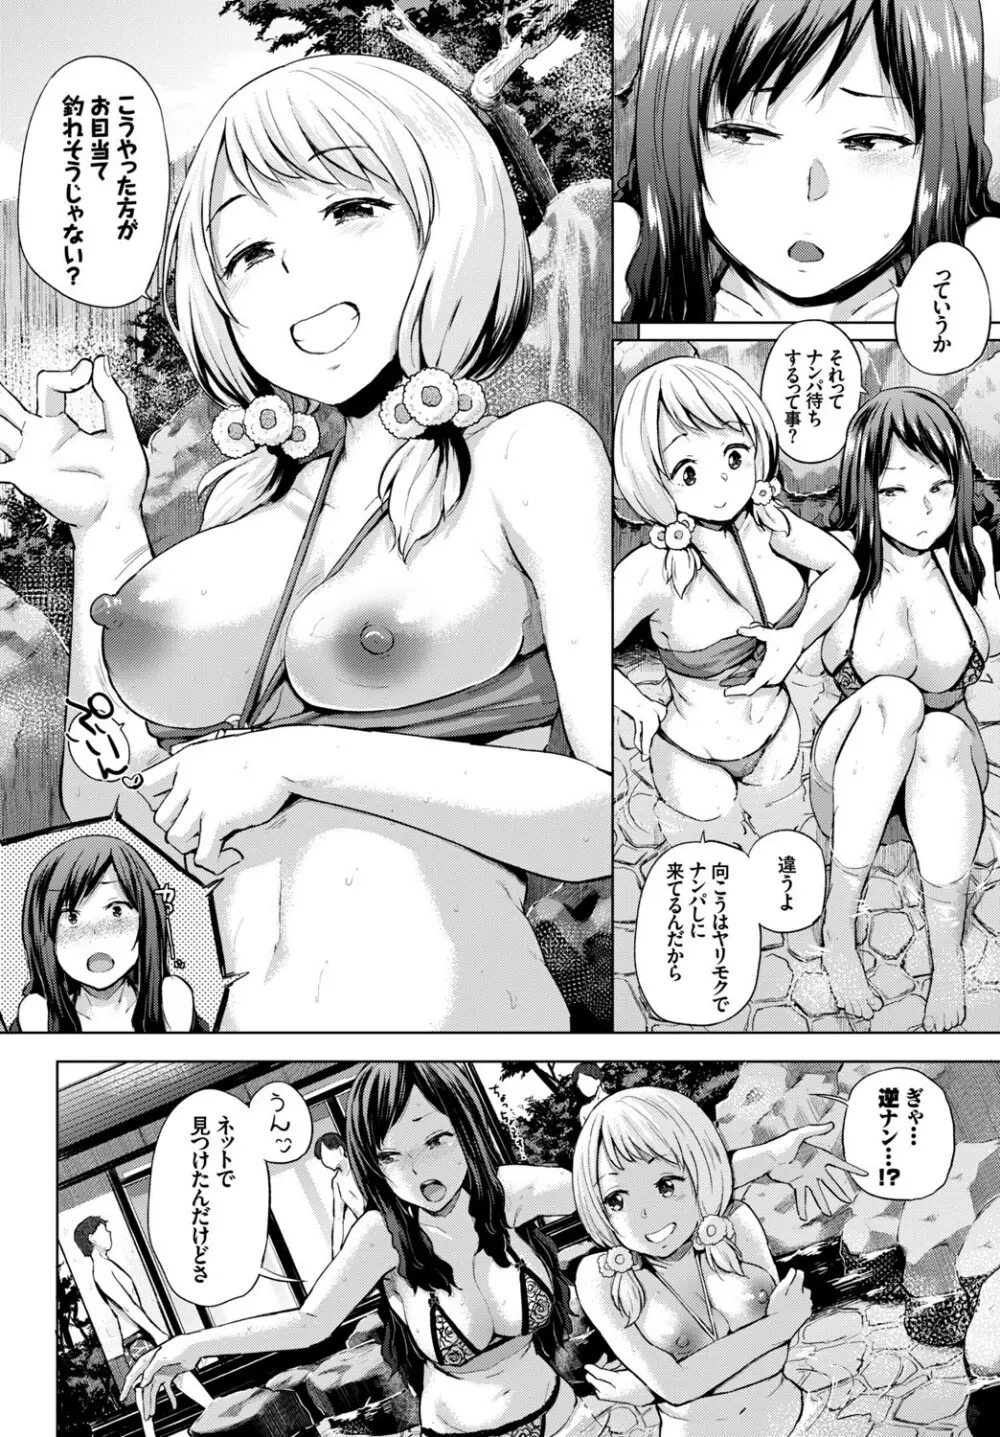 COMIC BAVEL SPECIAL COLLECTION VOL.9 30ページ